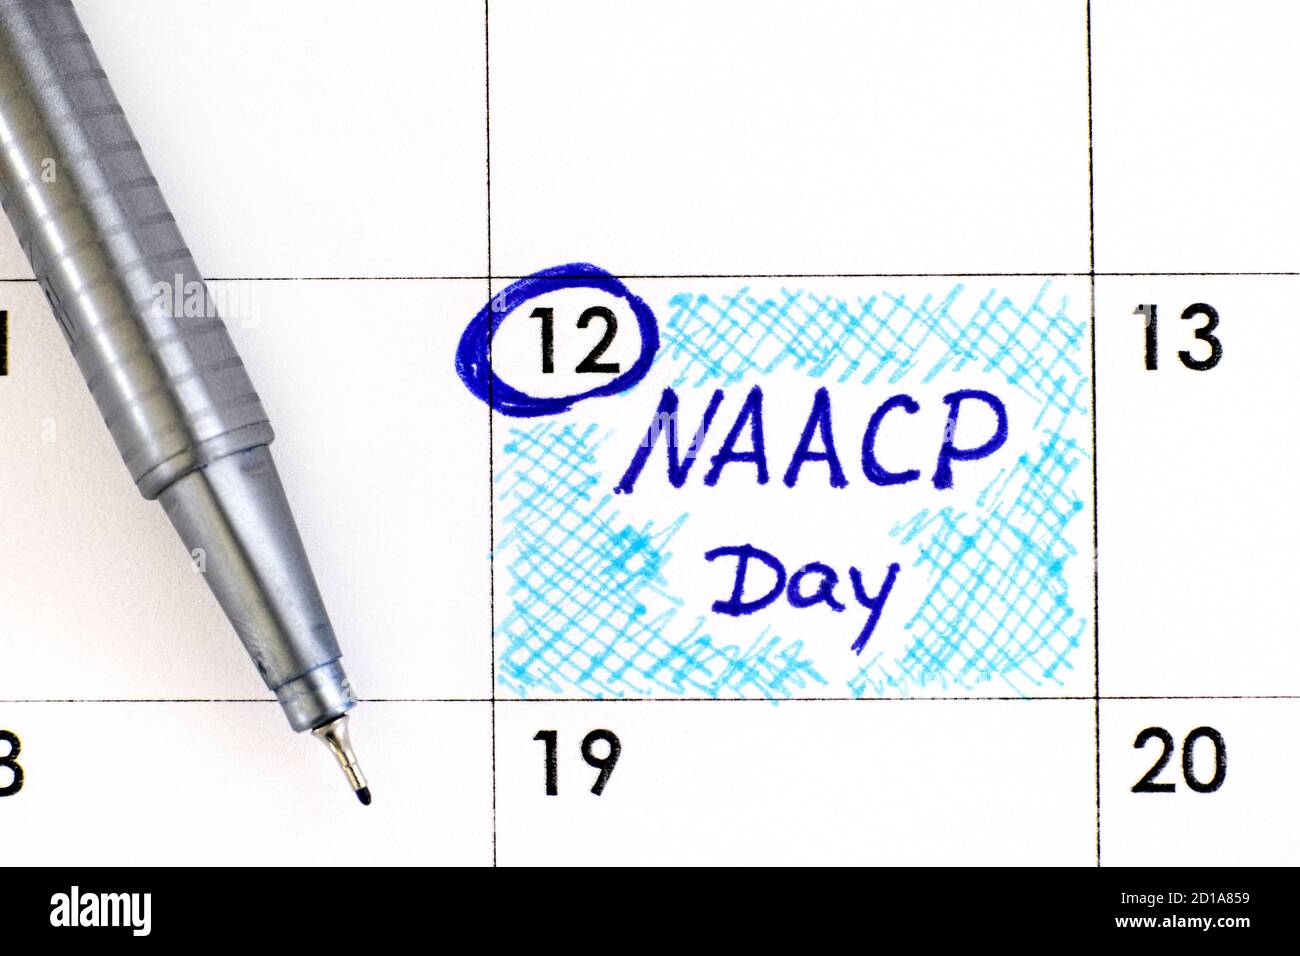 Reminder NAACP Day in calendar with pen. February 12. Stock Photo